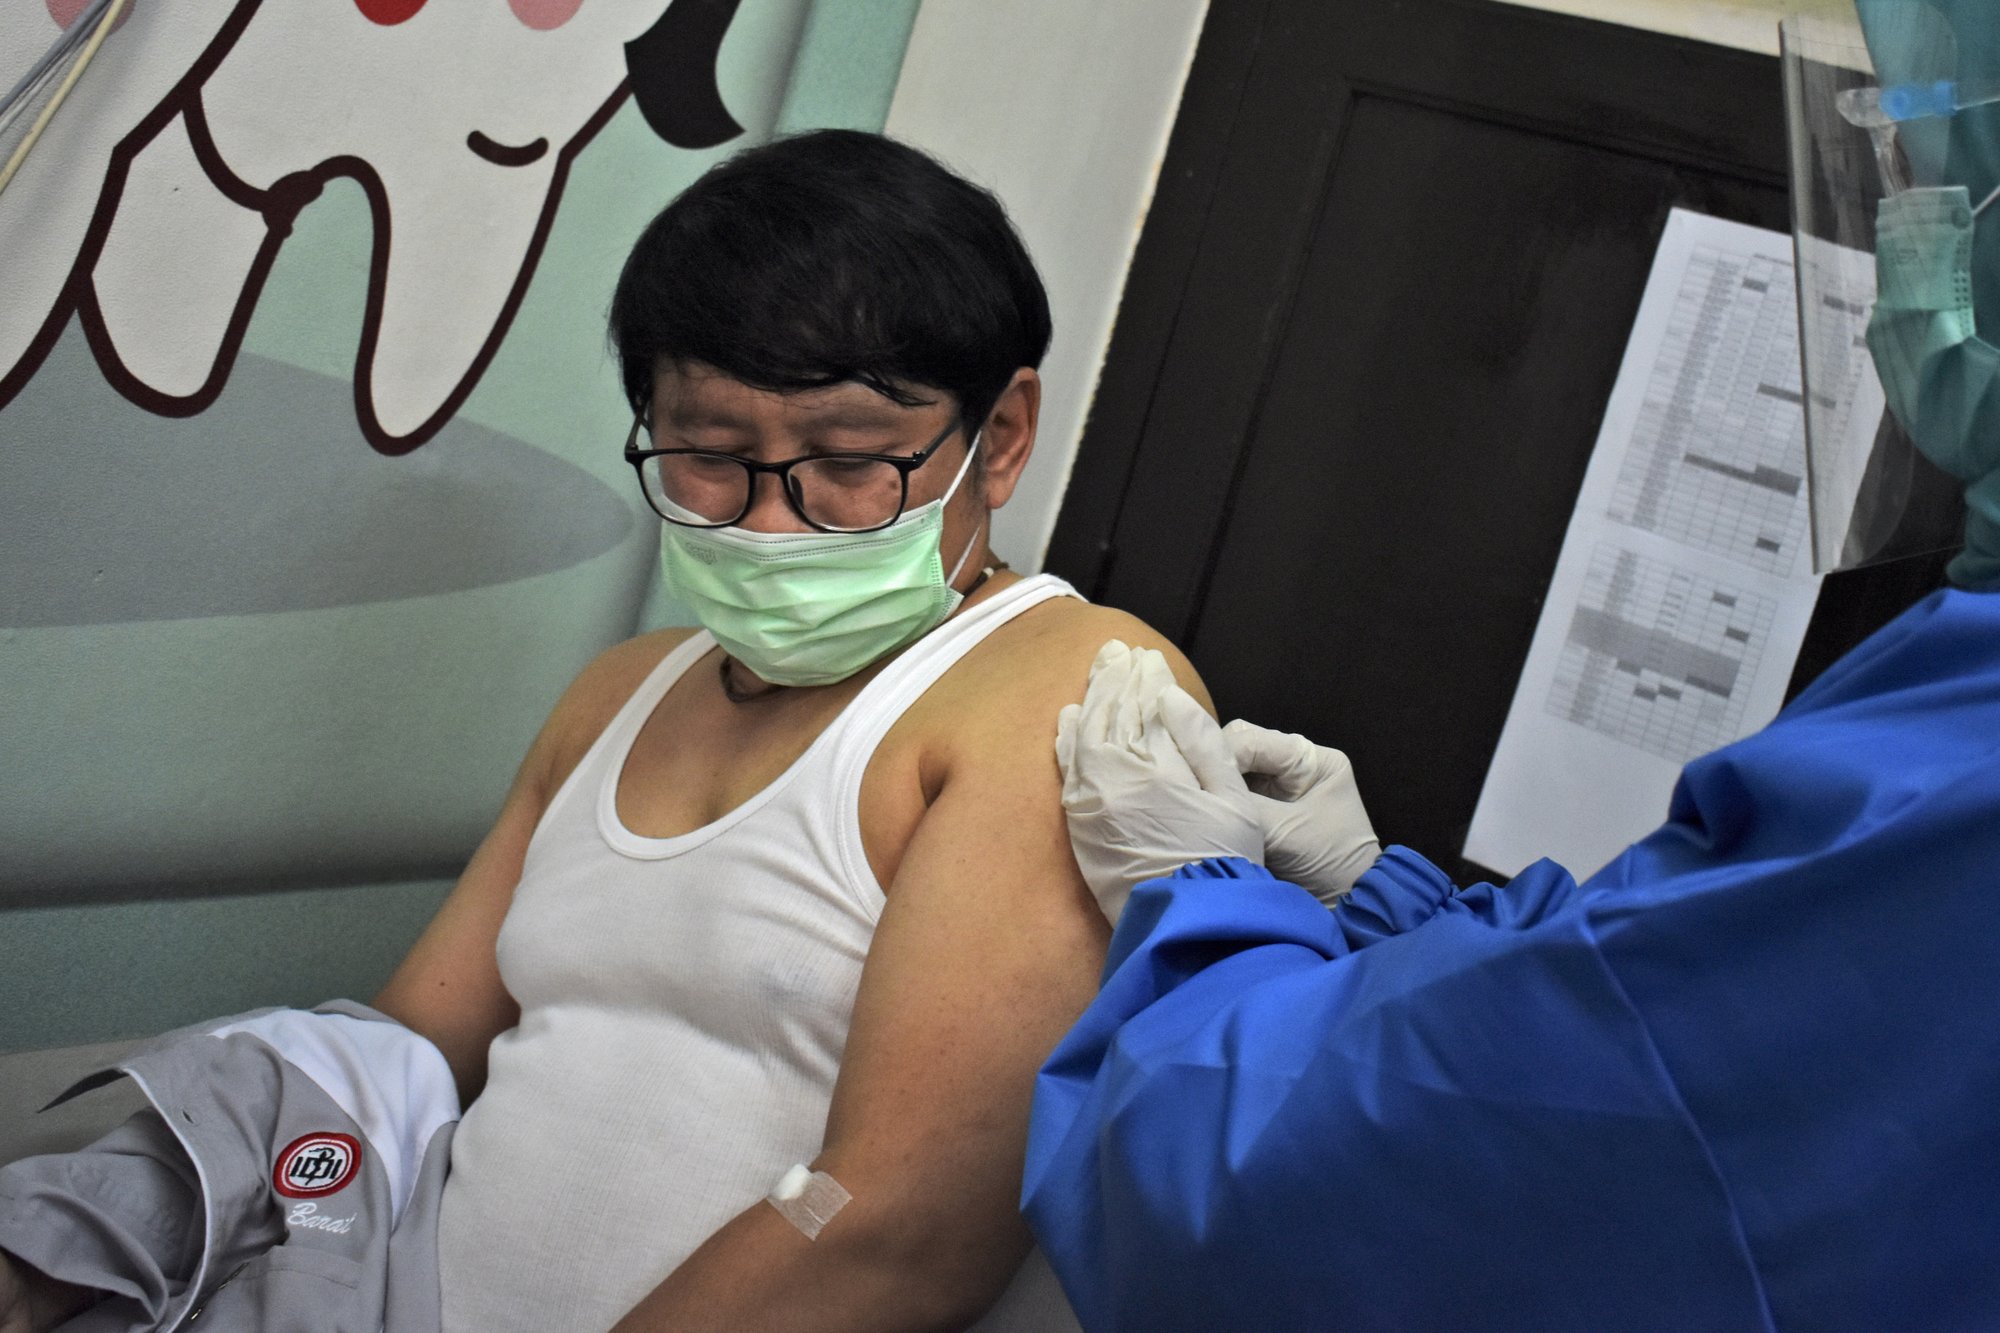 With the slow development of its own phase three clinical trial of a Covid-19 vaccine candidate, Indonesia said it has asked for data from Brazil, where a similar trial is progressing smoothly.